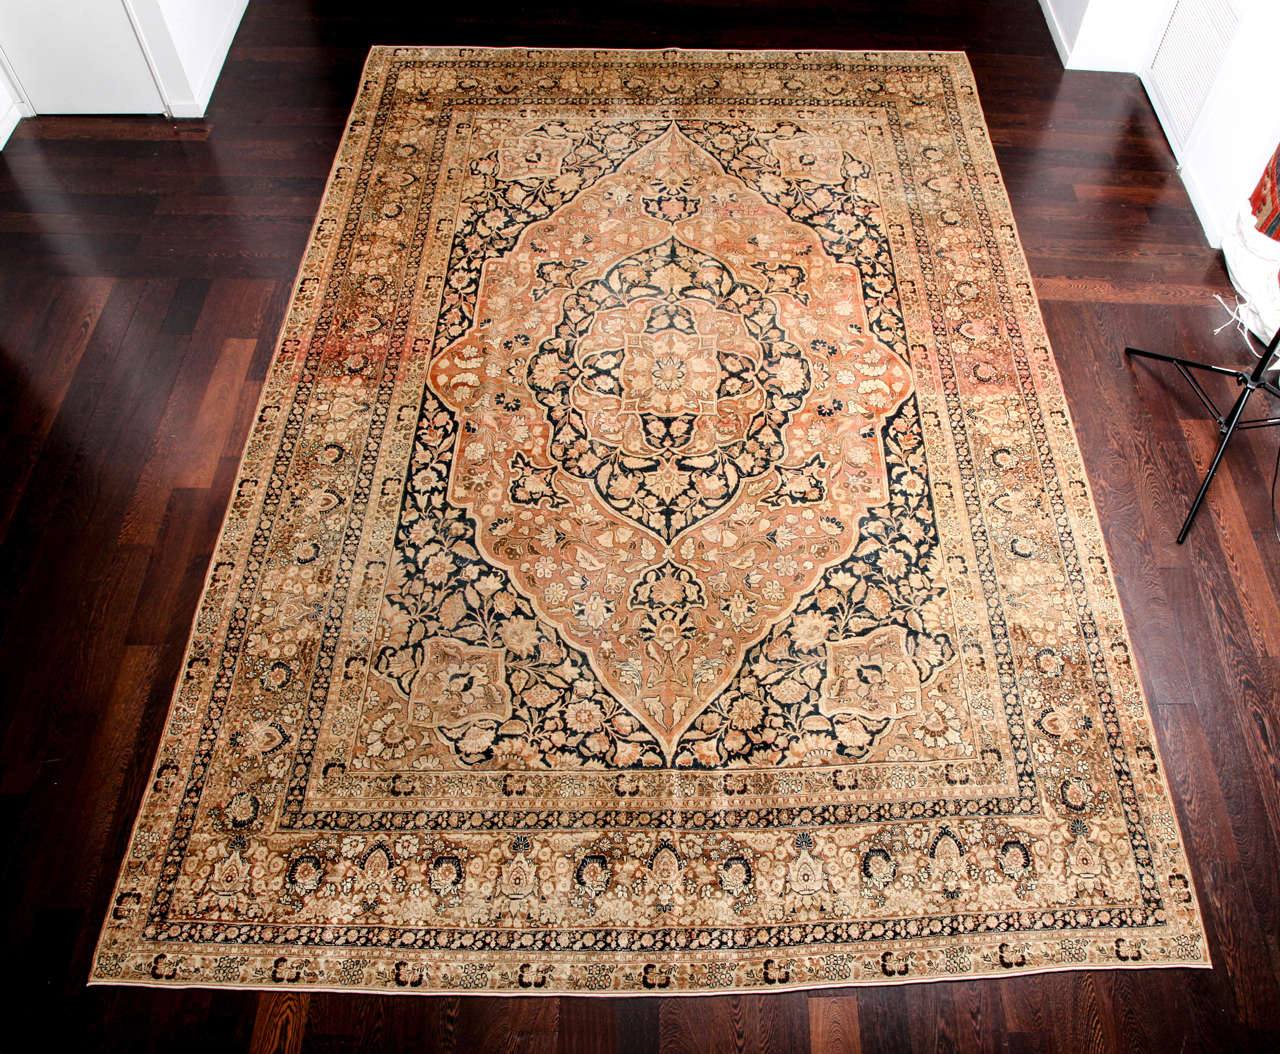 This Persian Haji Jalili carpet created, consists of cotton warp and threads, a hand-knotted wool pile and natural vegetable dyes, circa 1880. From the workshop of master weaver Haji Jalili, one of the foremost artists of his time, the style and